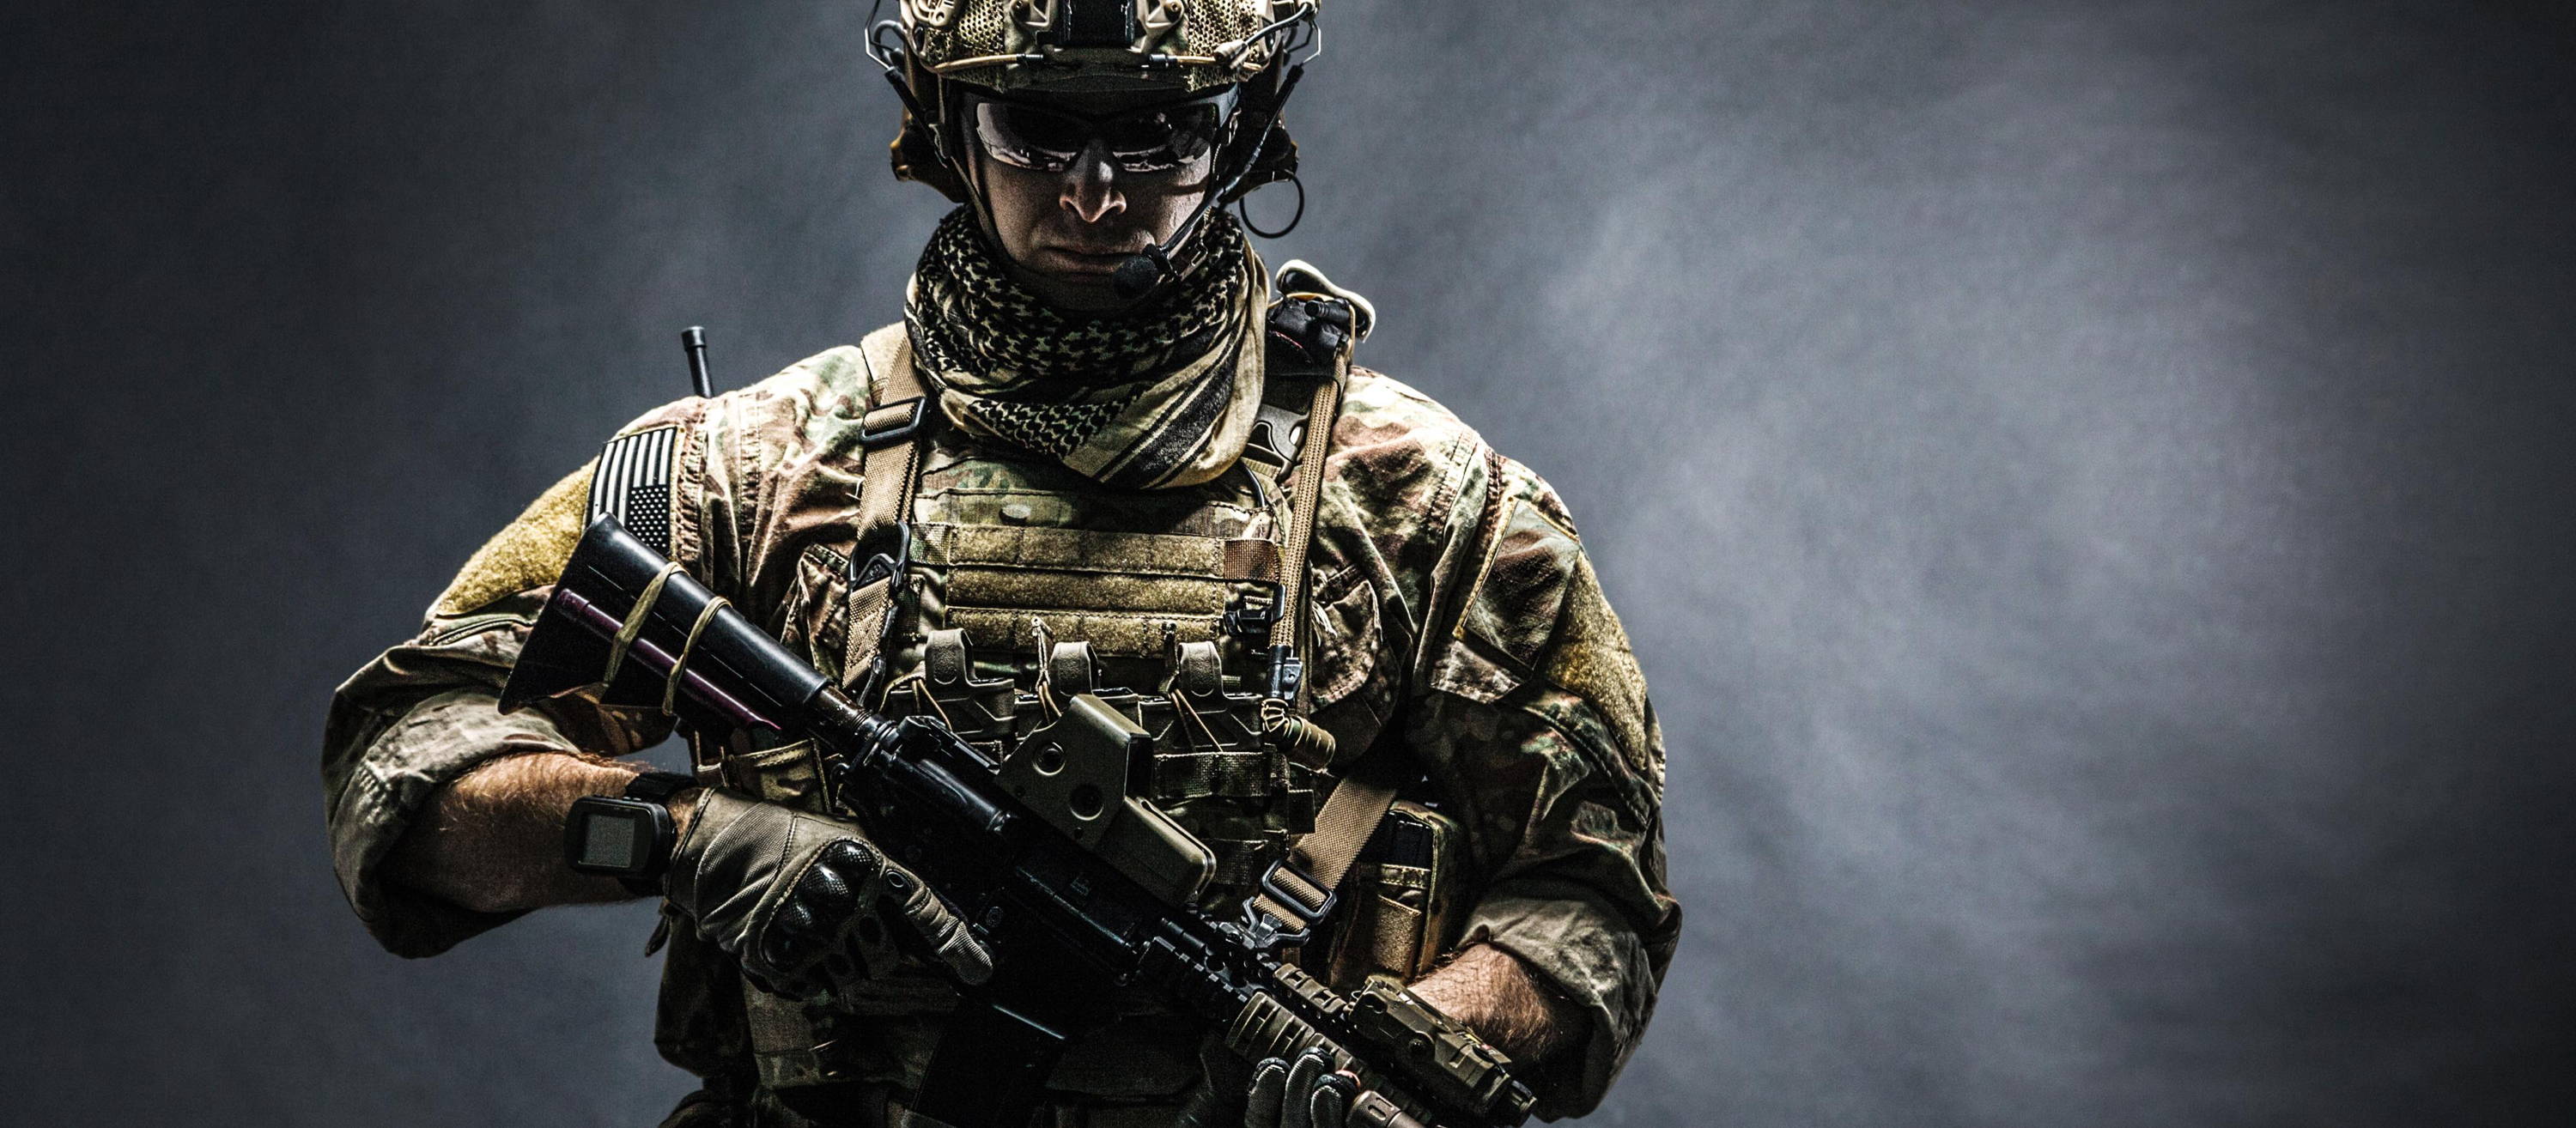 Army Ranger With Plate Carrier Holding AR-15